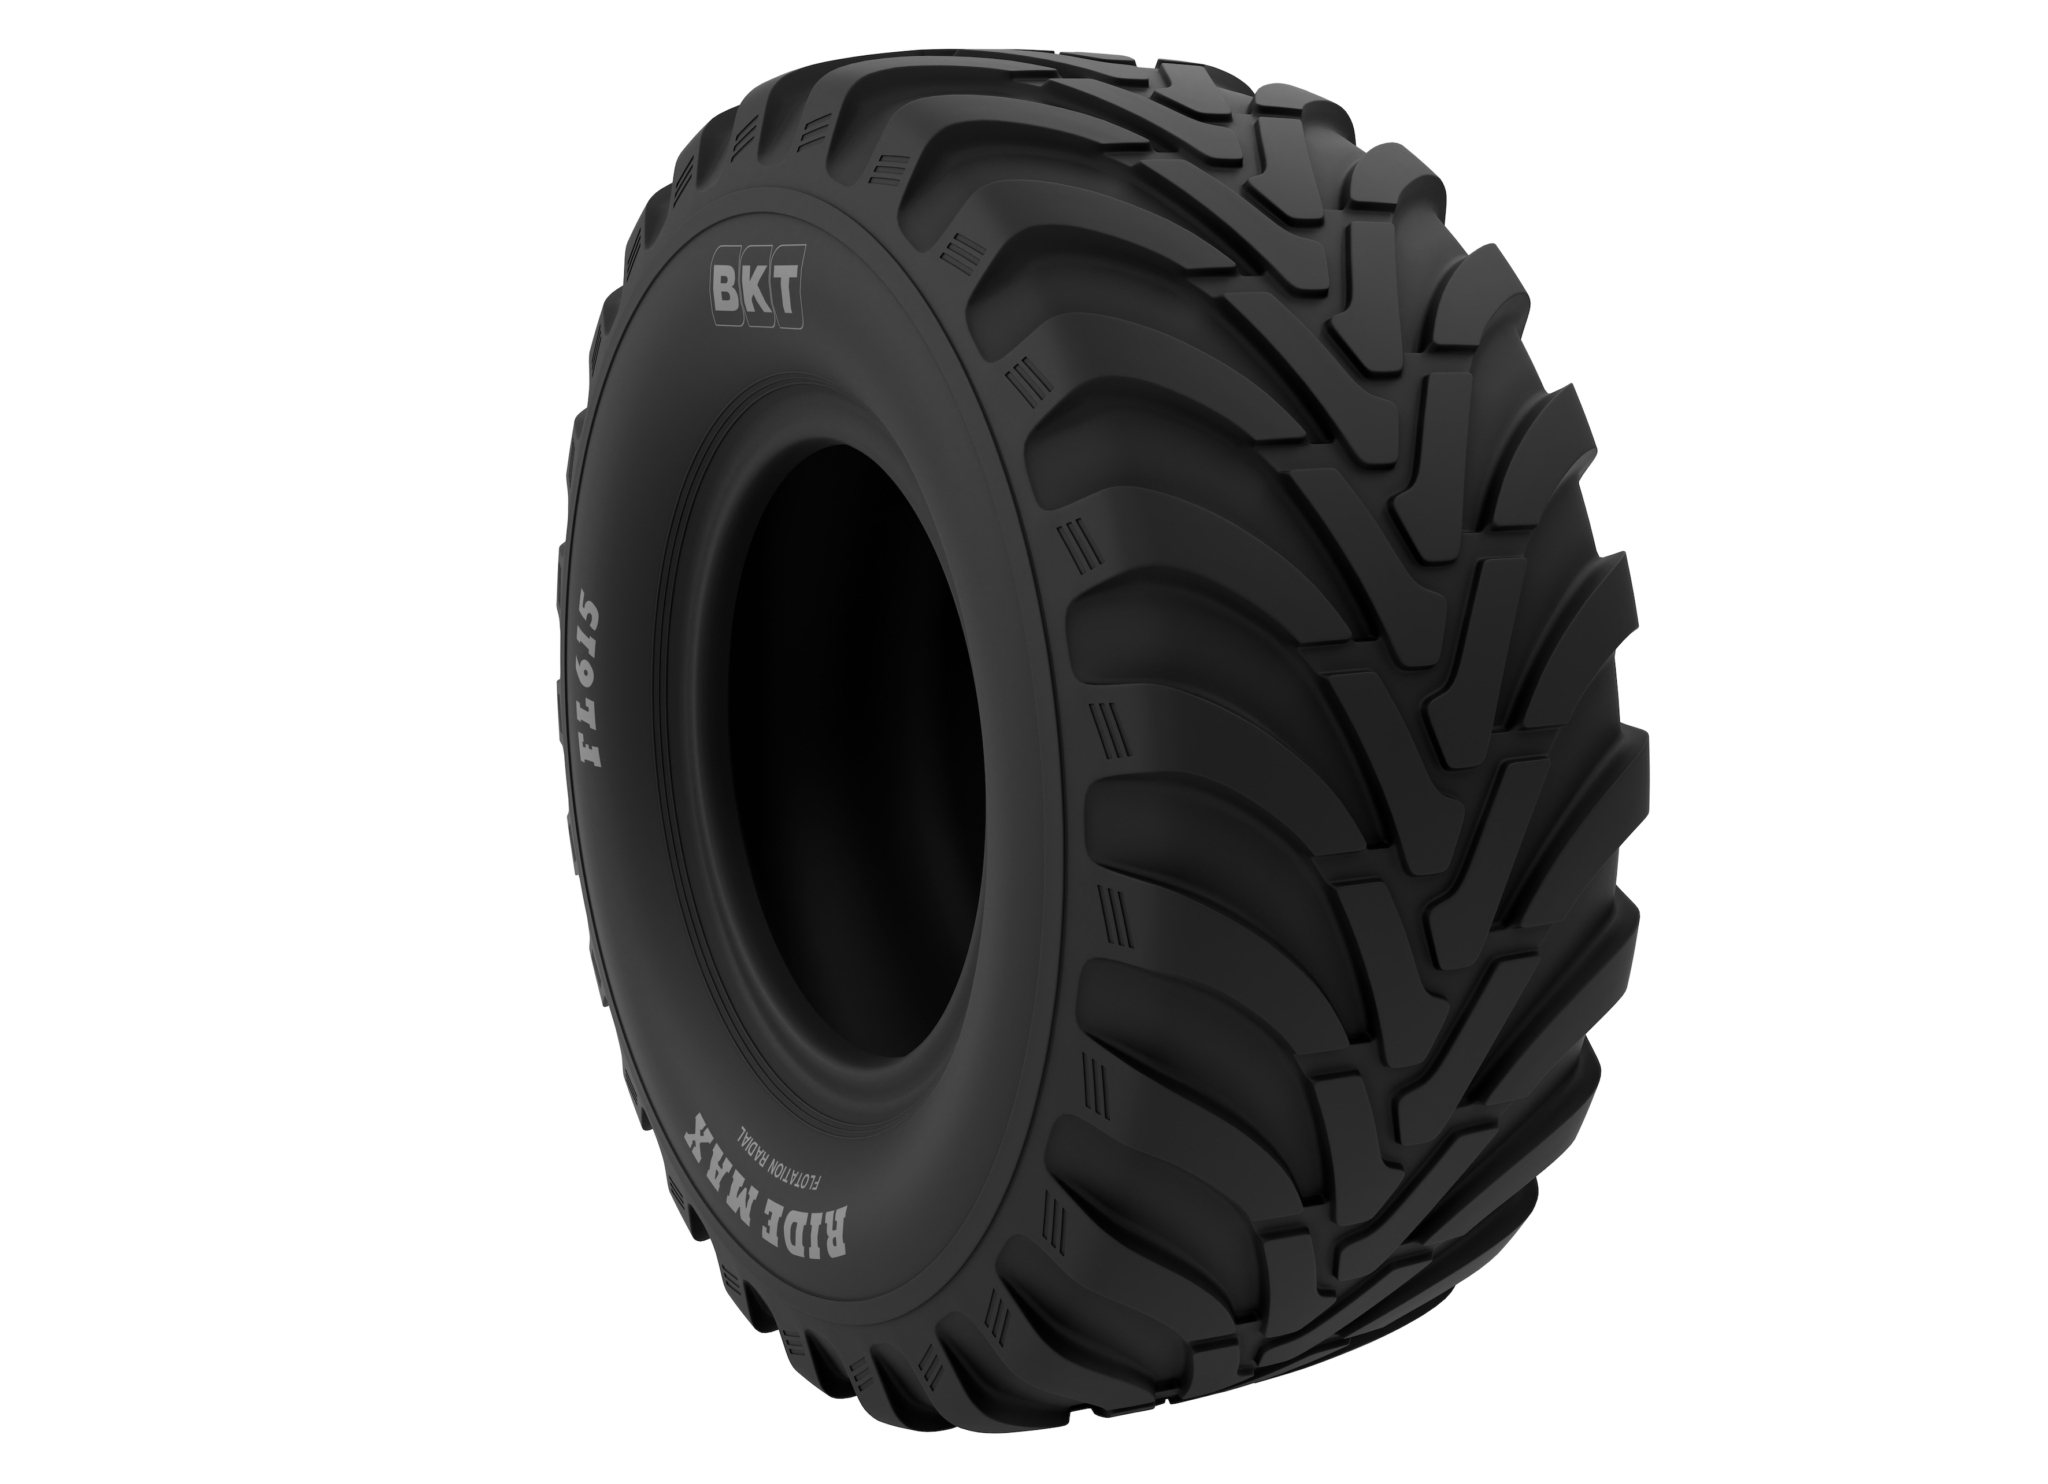 BKT launches Ridemax FL 615 flotation tyre for agricultural trailers, tank trucks, spreaders